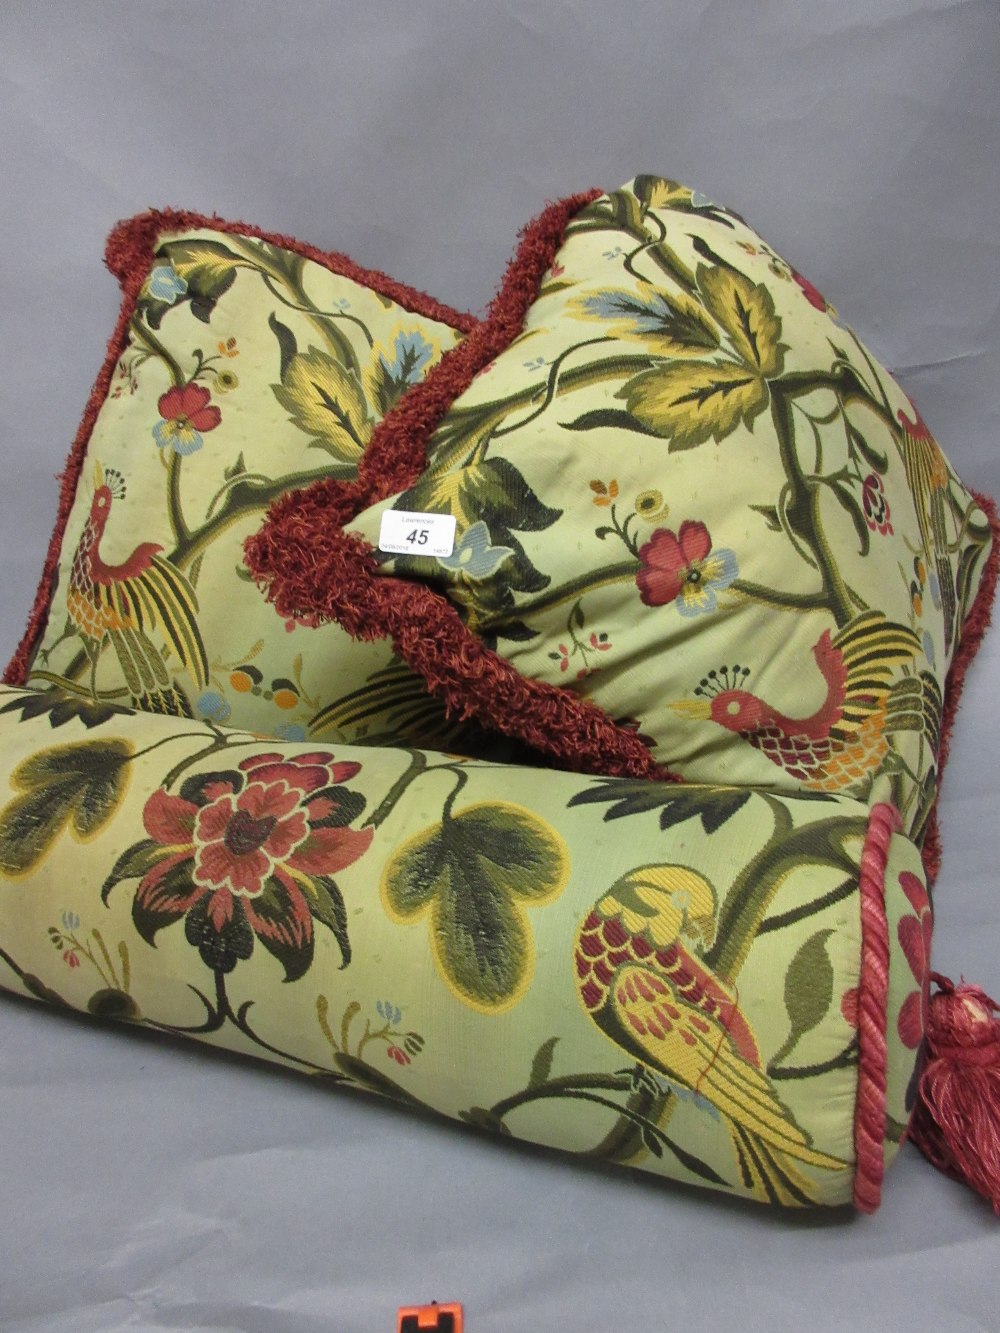 Quantity of cushions and two bolster cushions upholstered in G.P. and J.